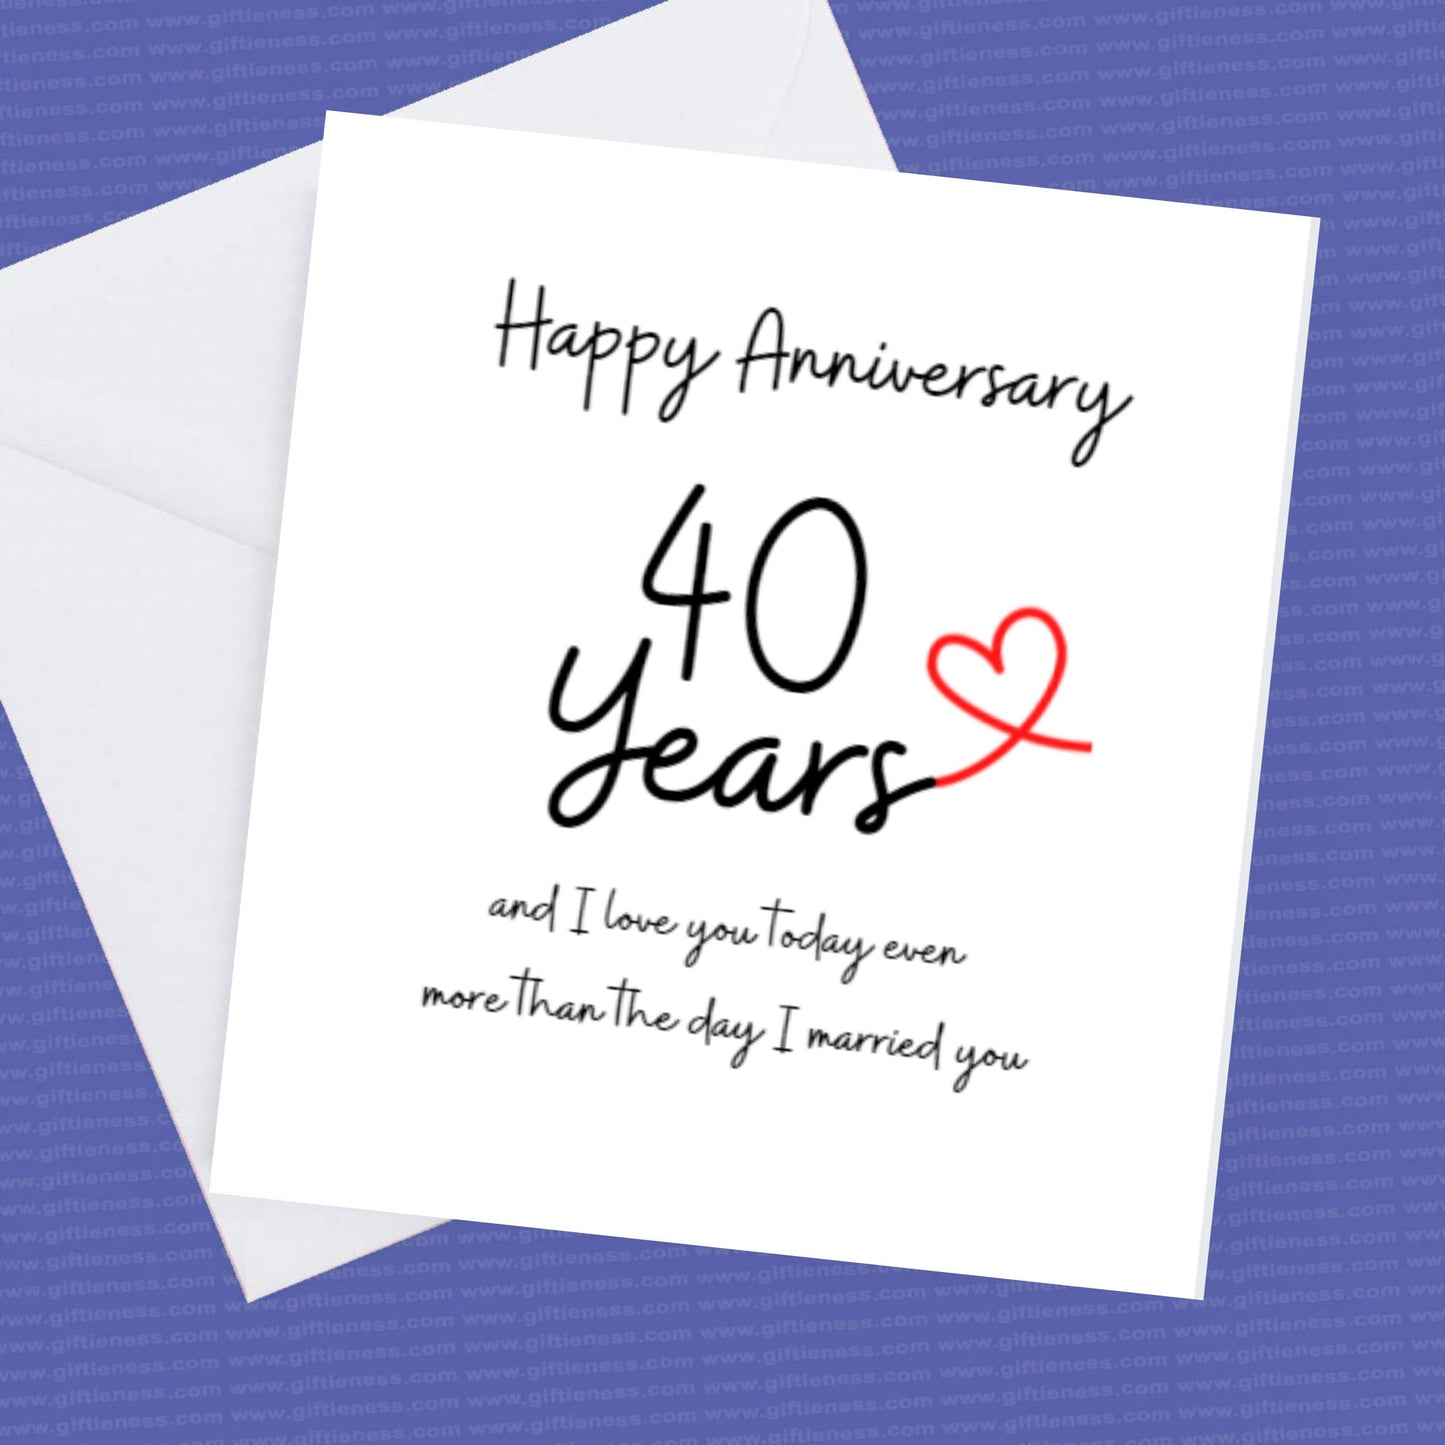 Wedding Anniversary Card can be personalised for any amount of years